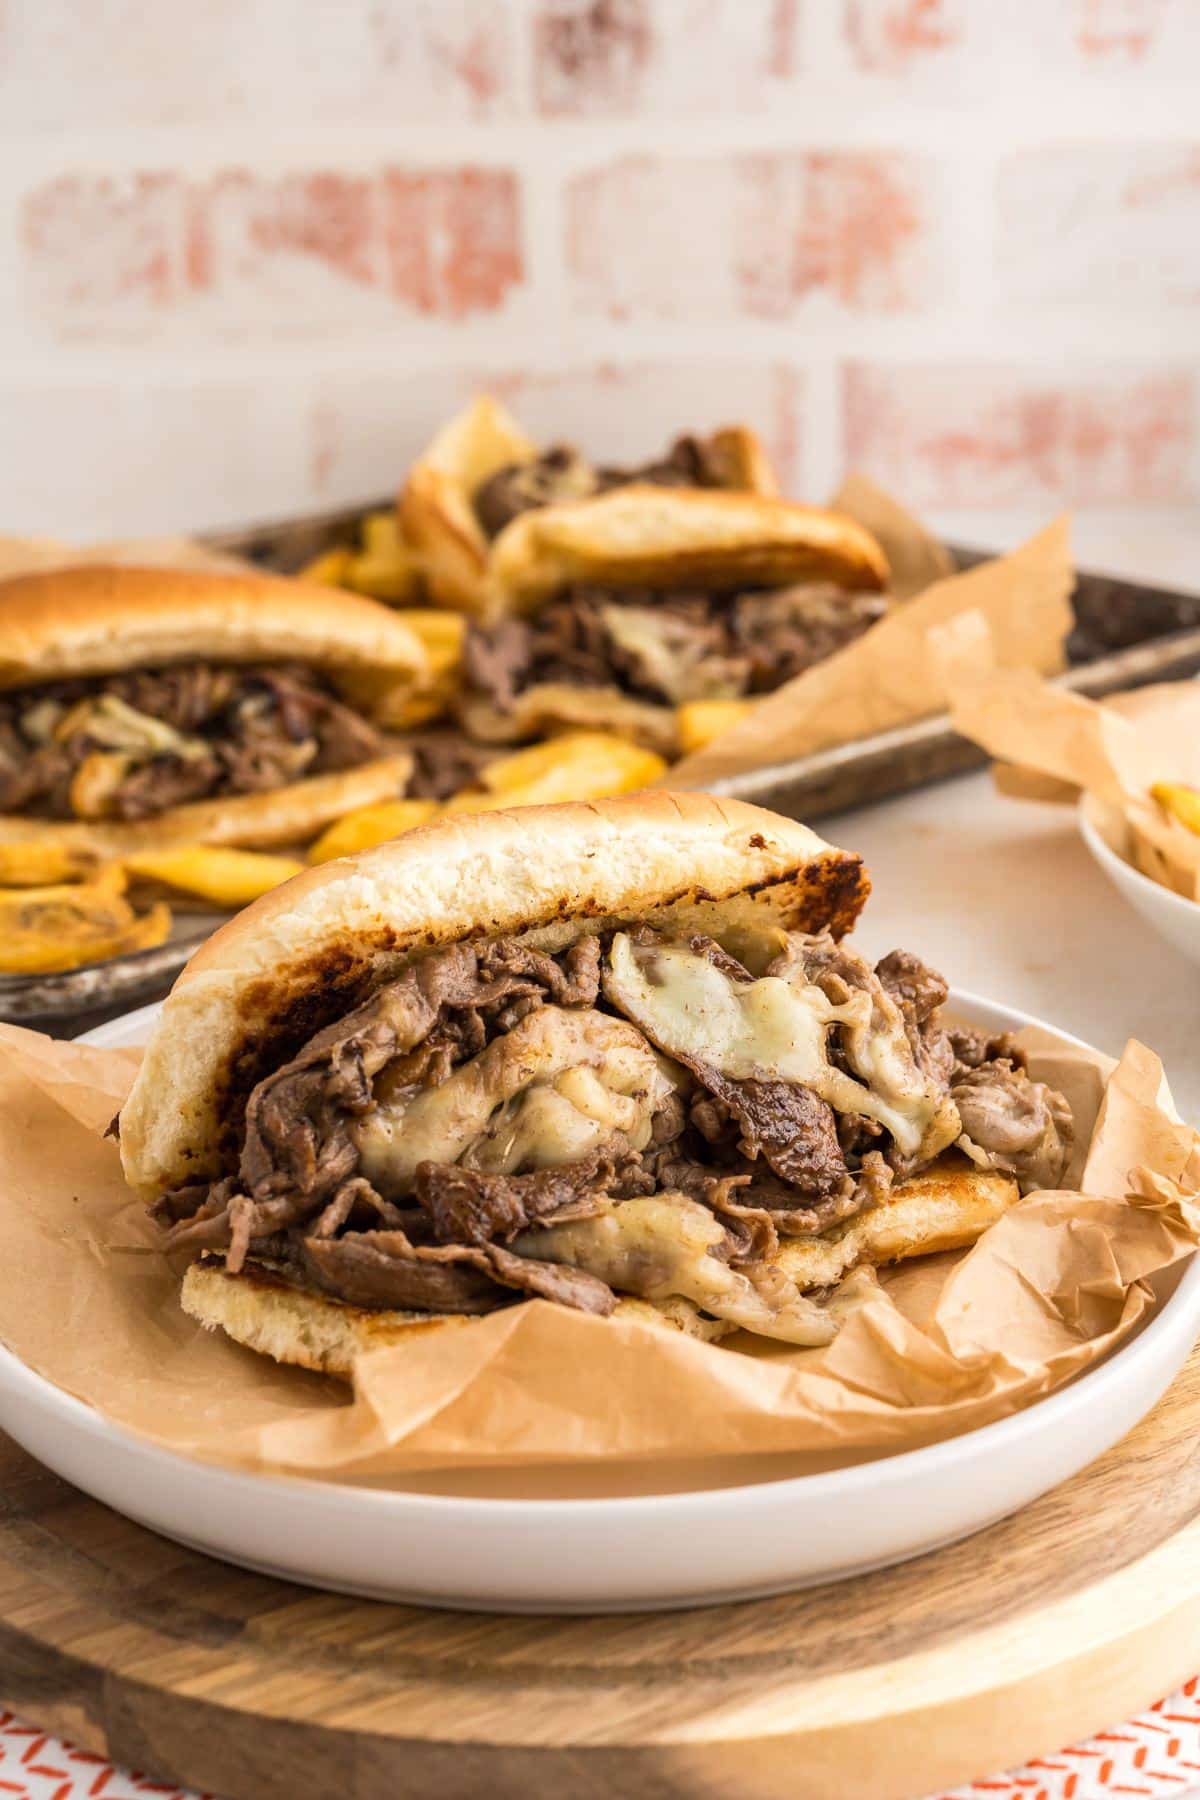 Philly Cheesesteak on a plate with two more sandwiches in the background with steak fries.